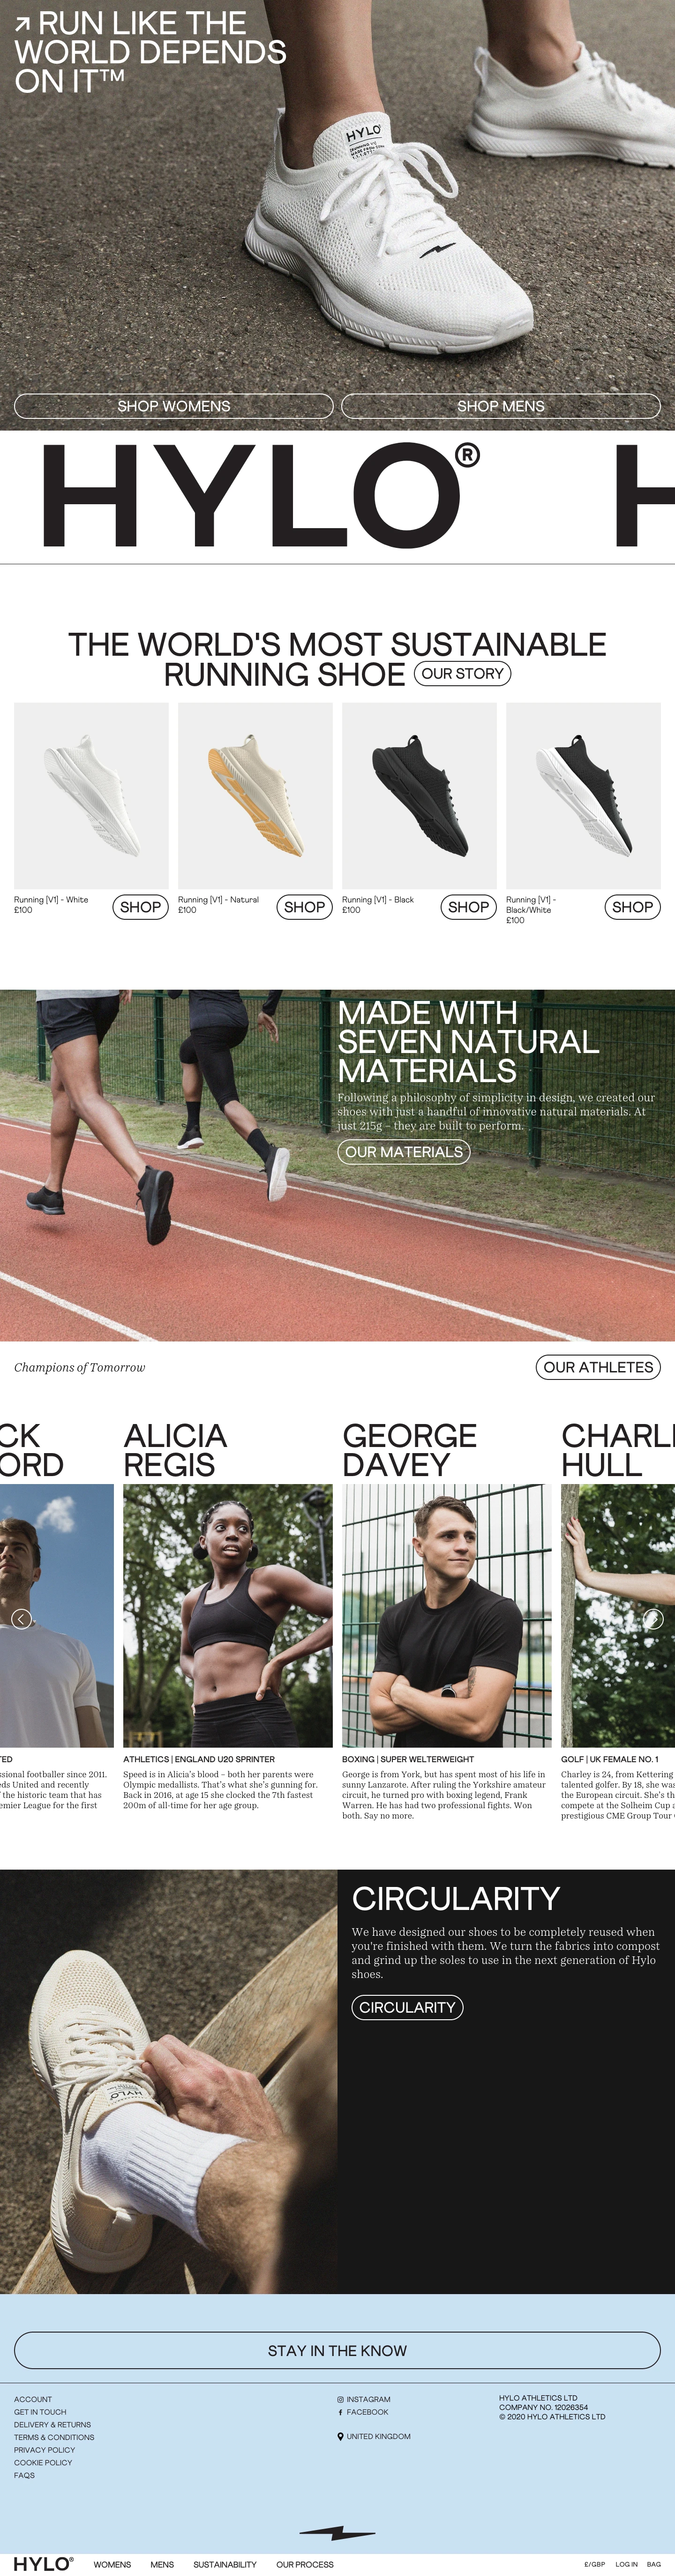 Hylo Athletics Landing Page Example: The world's most sustainable running shoe - Made with seven natural materials and weighing only 215g, this superfast and lightweight runner is perfect for everyday running and training in the gym .